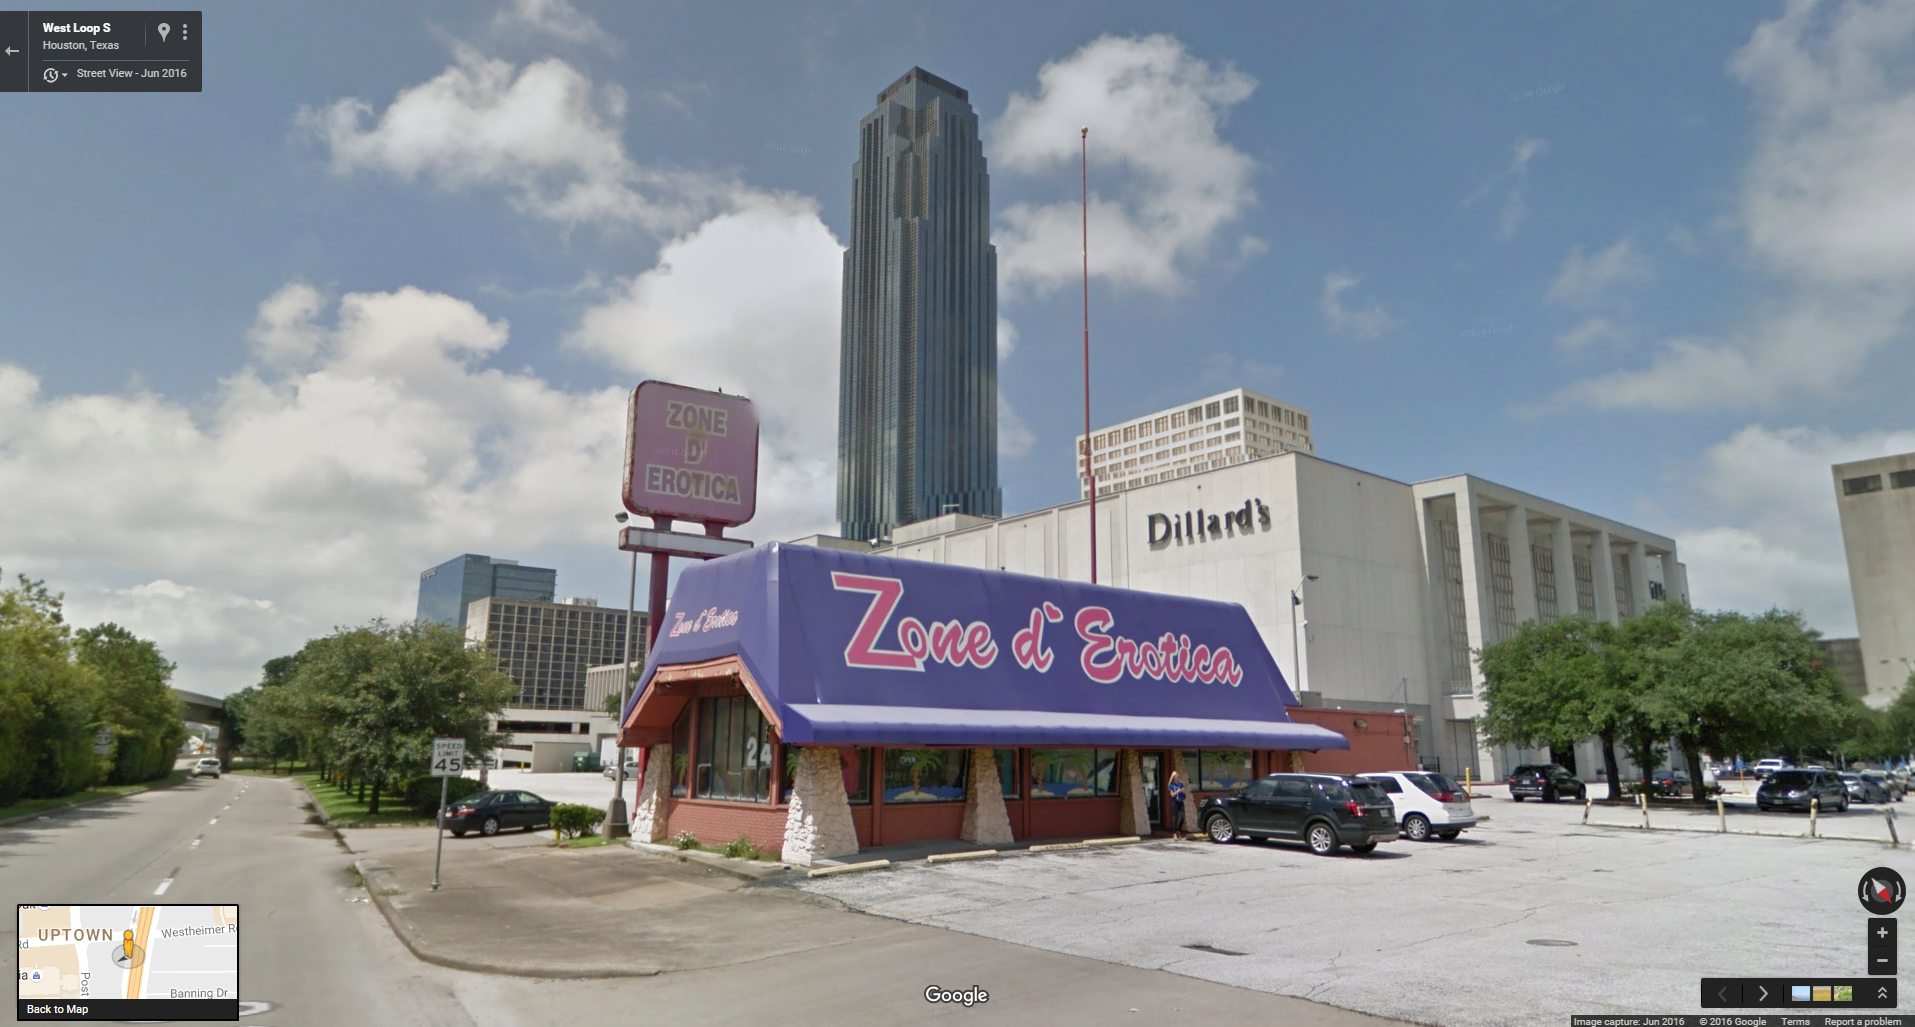 The weirdest images to come from Houston's lack of zoning laws